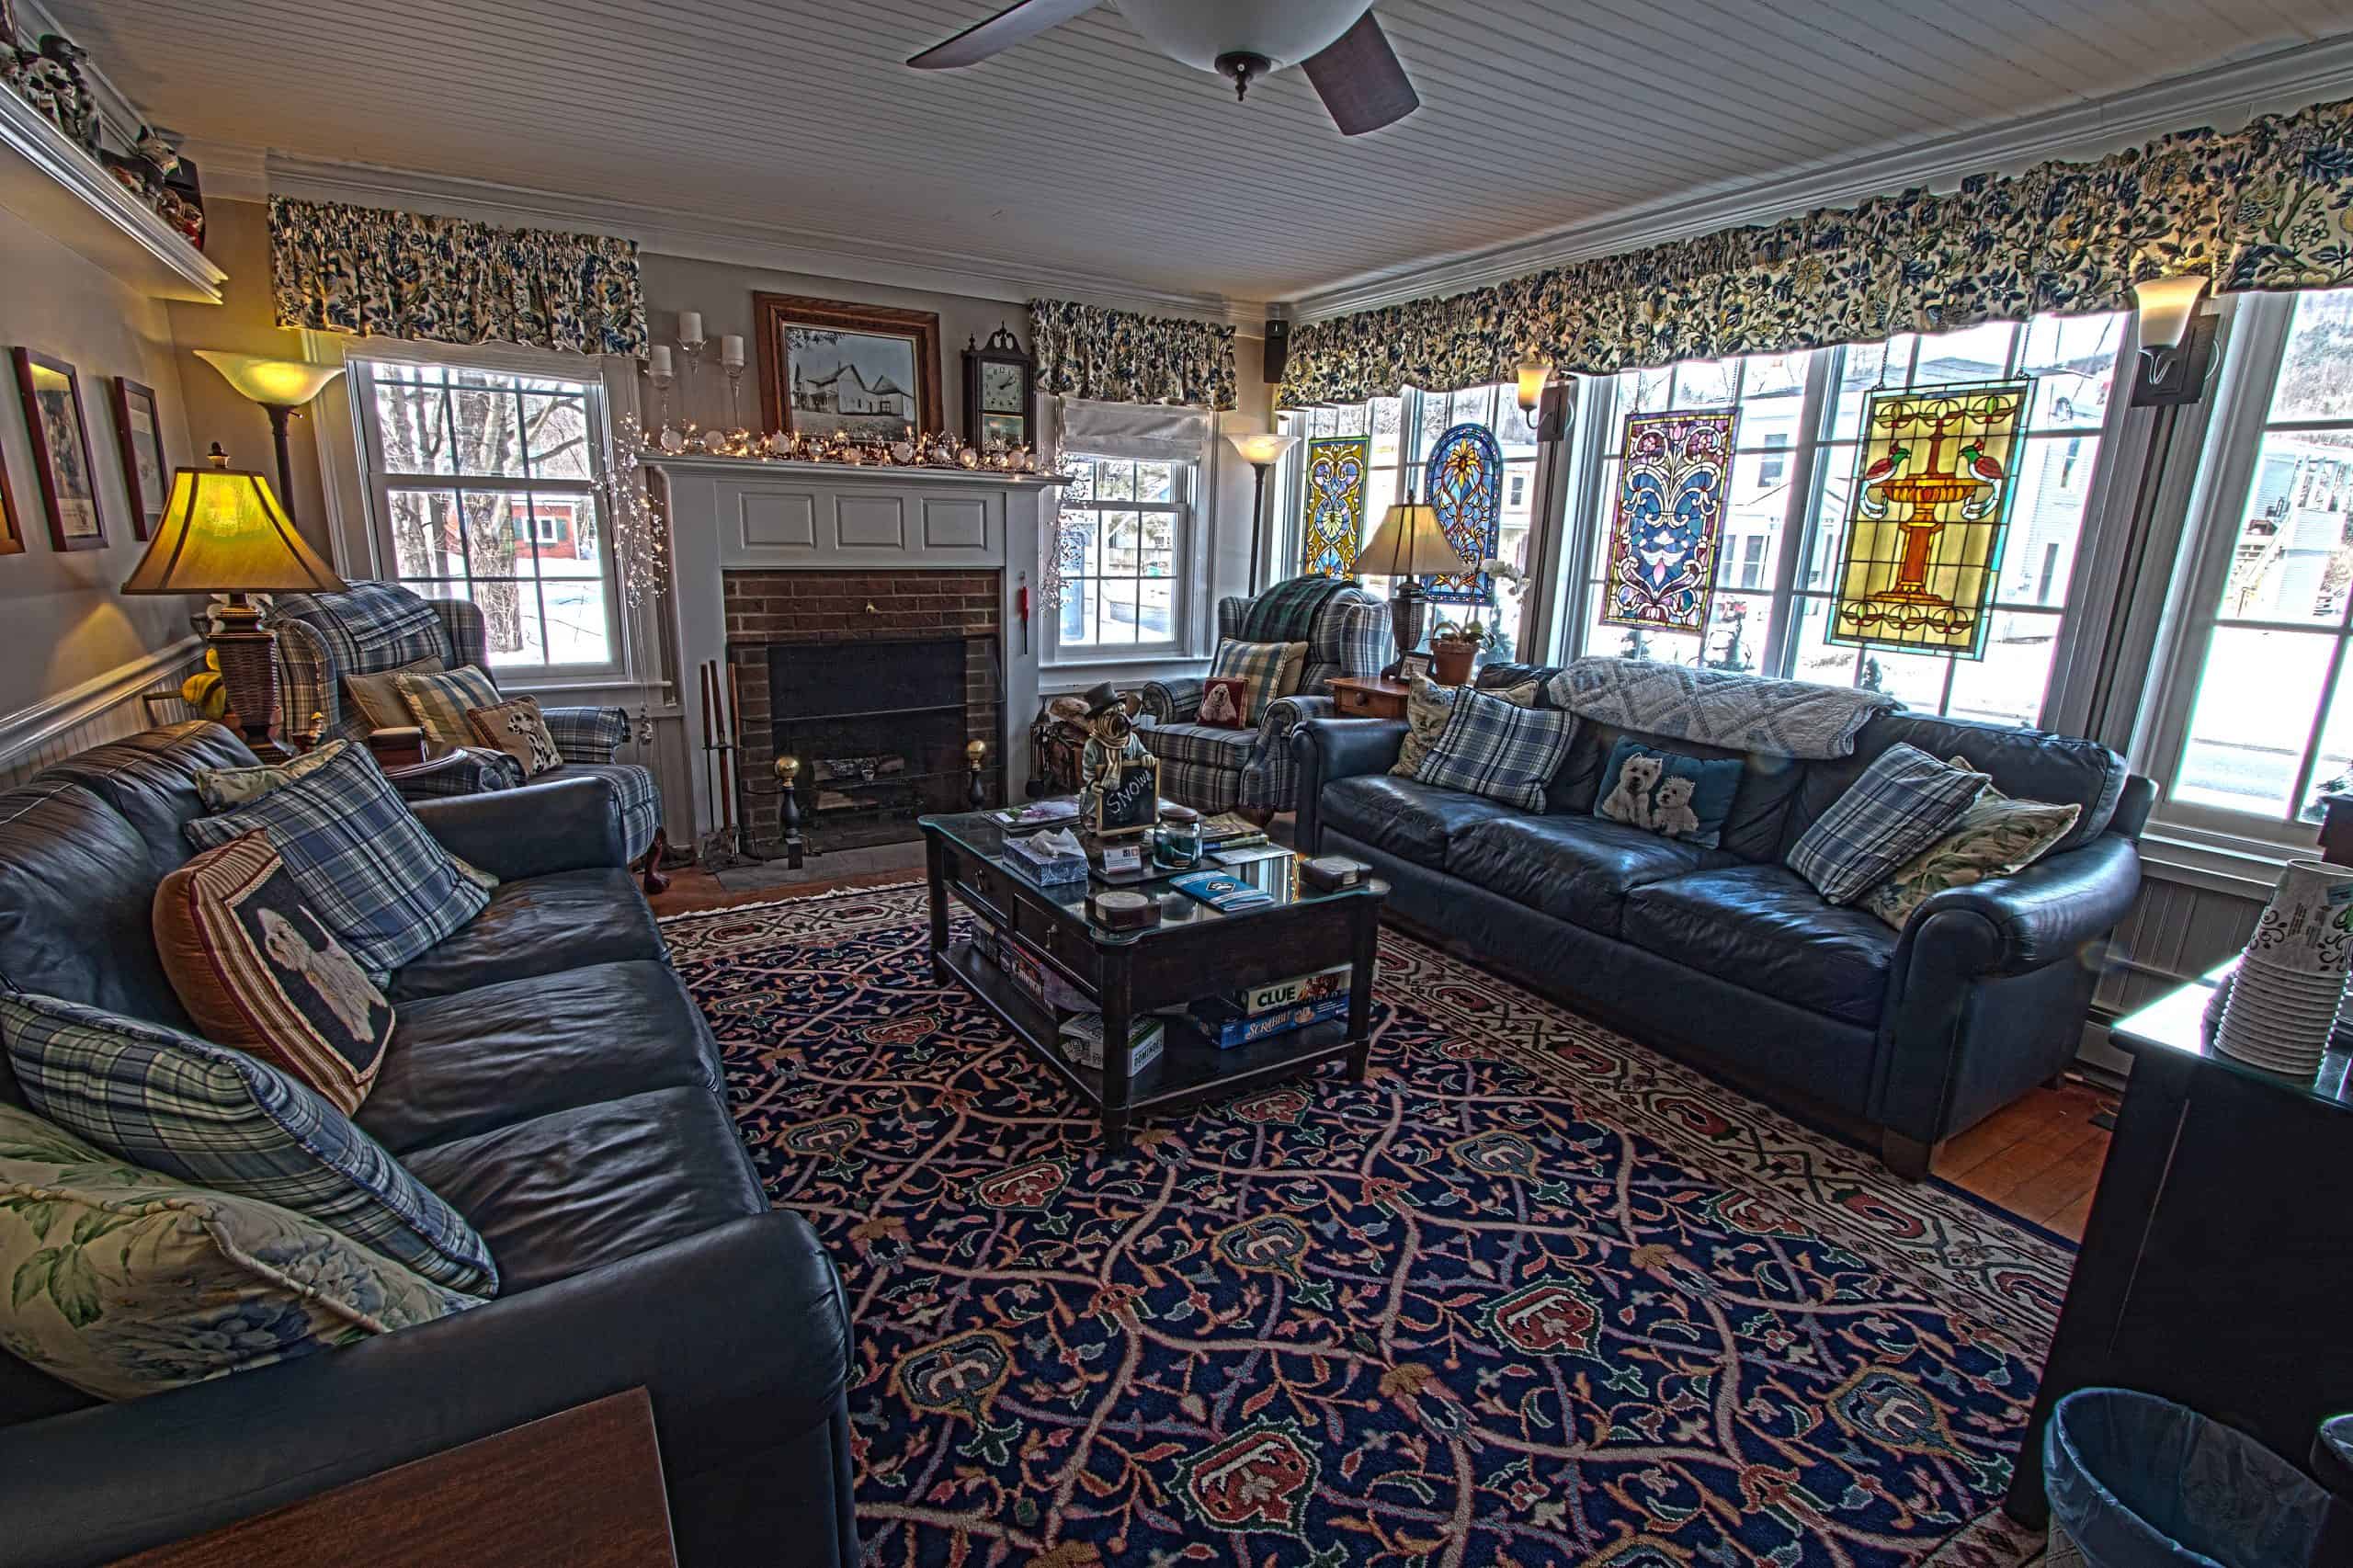 Phineas Swann Inn & Spa - Common Room with Fireplace